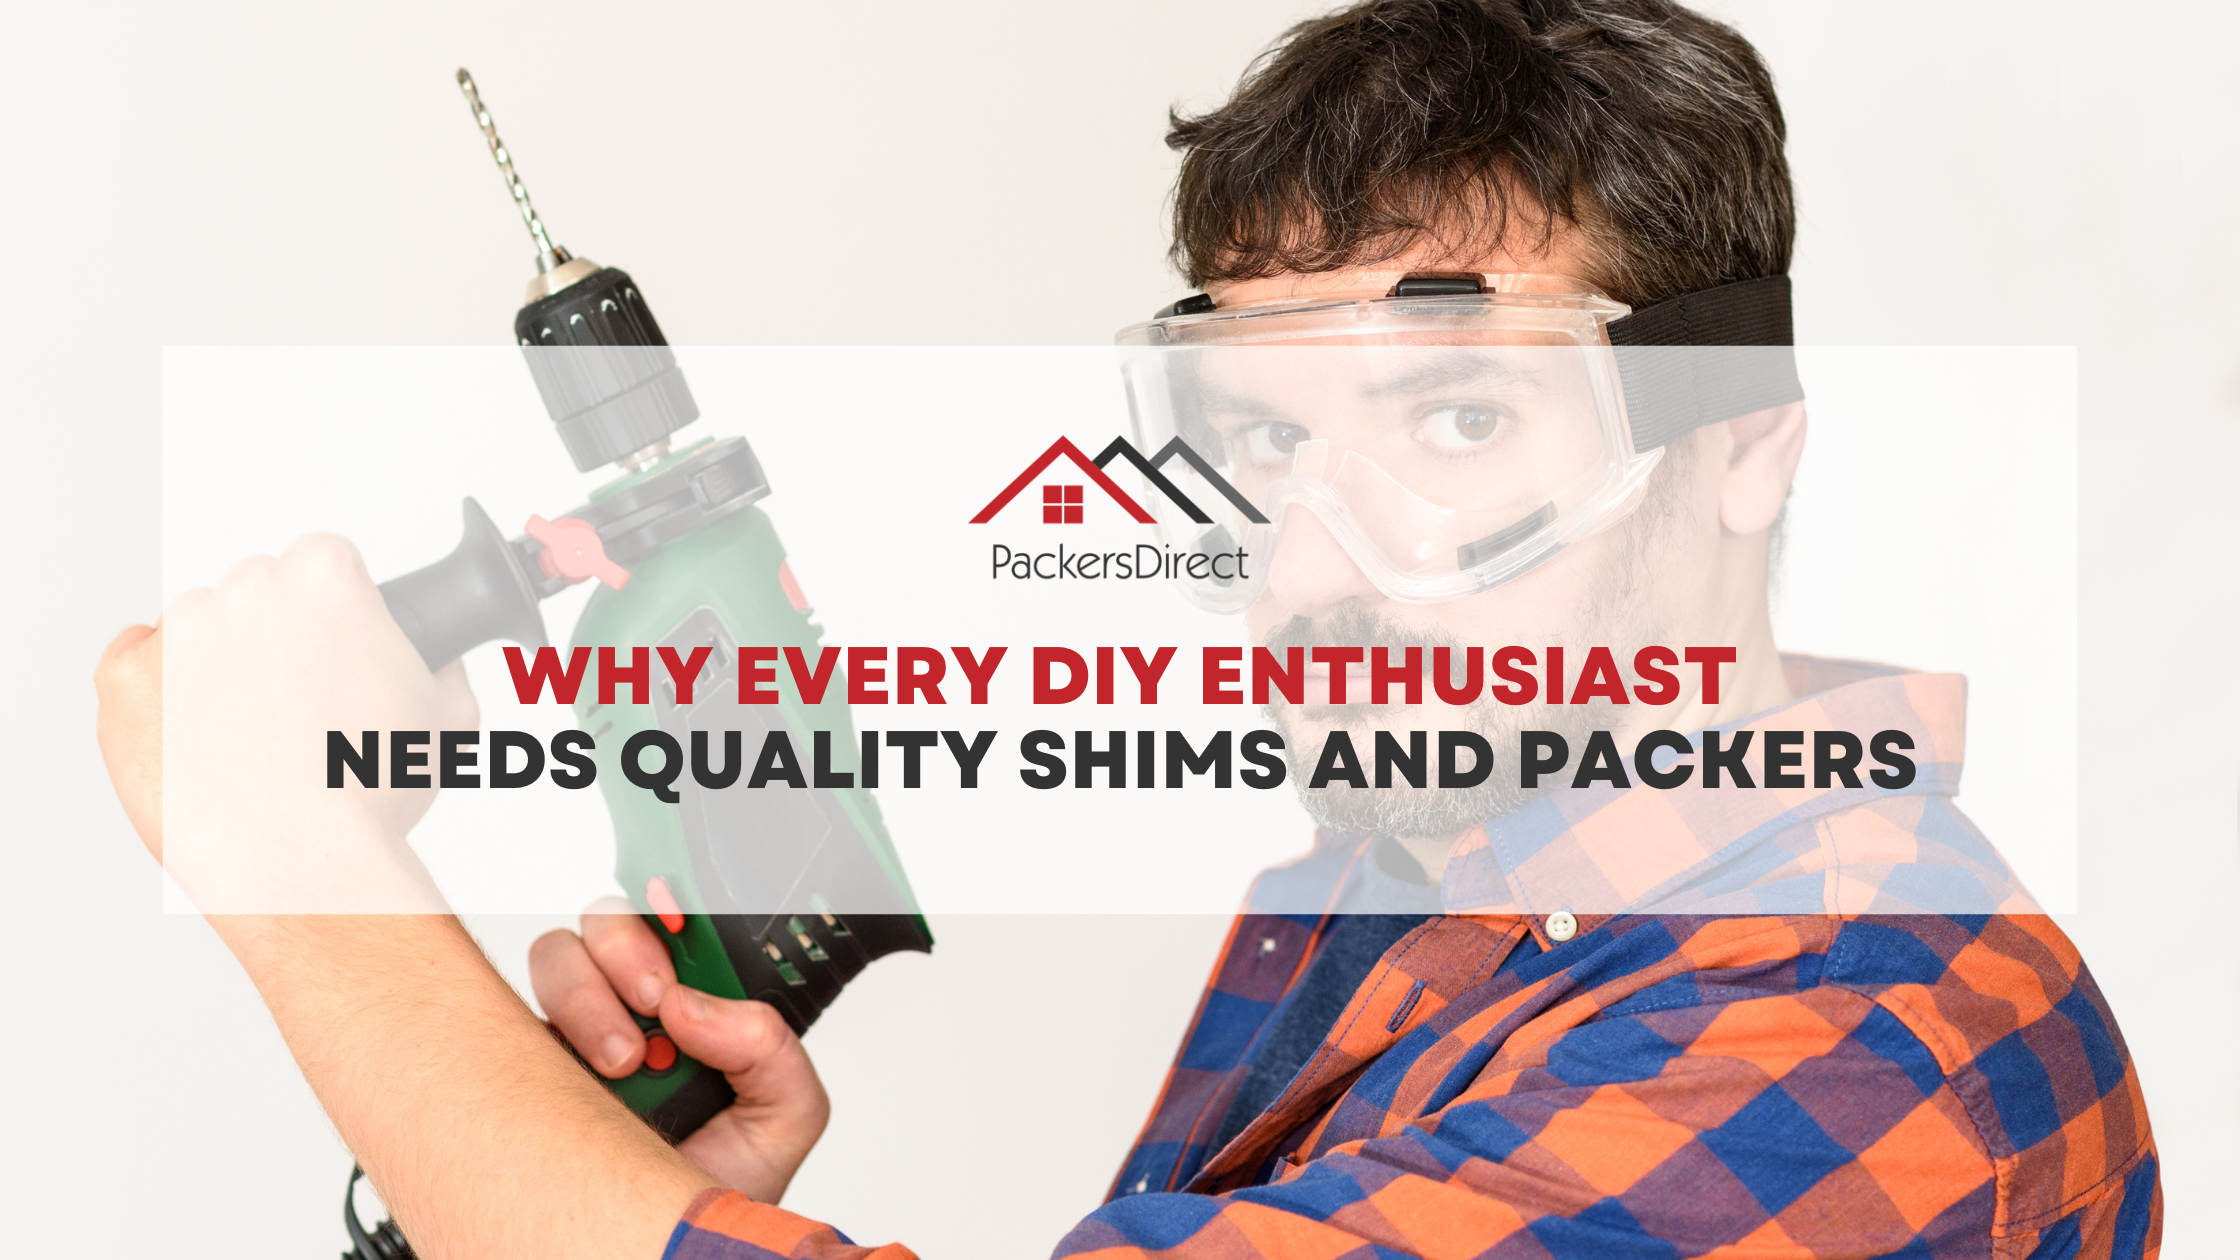 Why Every DIY Enthusiast Needs Quality Shims and Packers